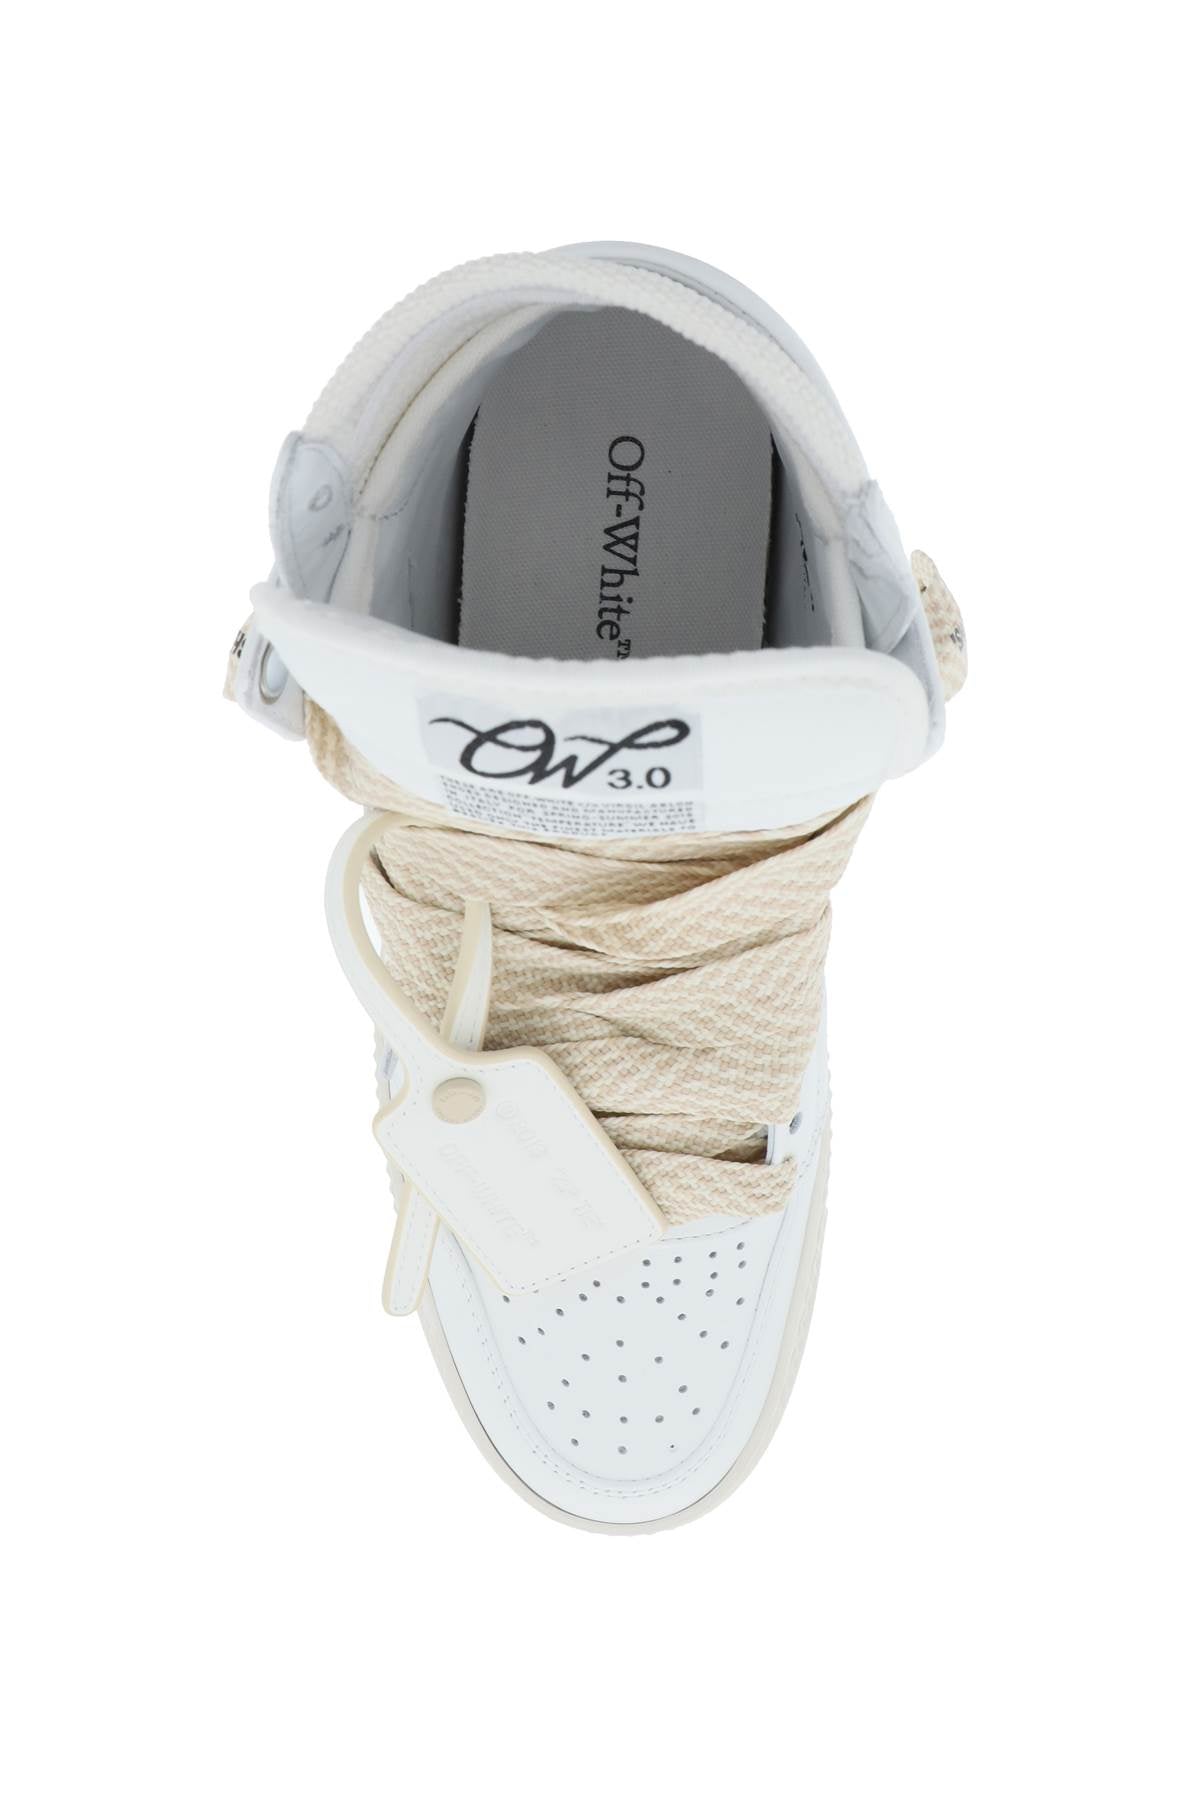 OFF-WHITE White Leather High-Top Trainers for Women